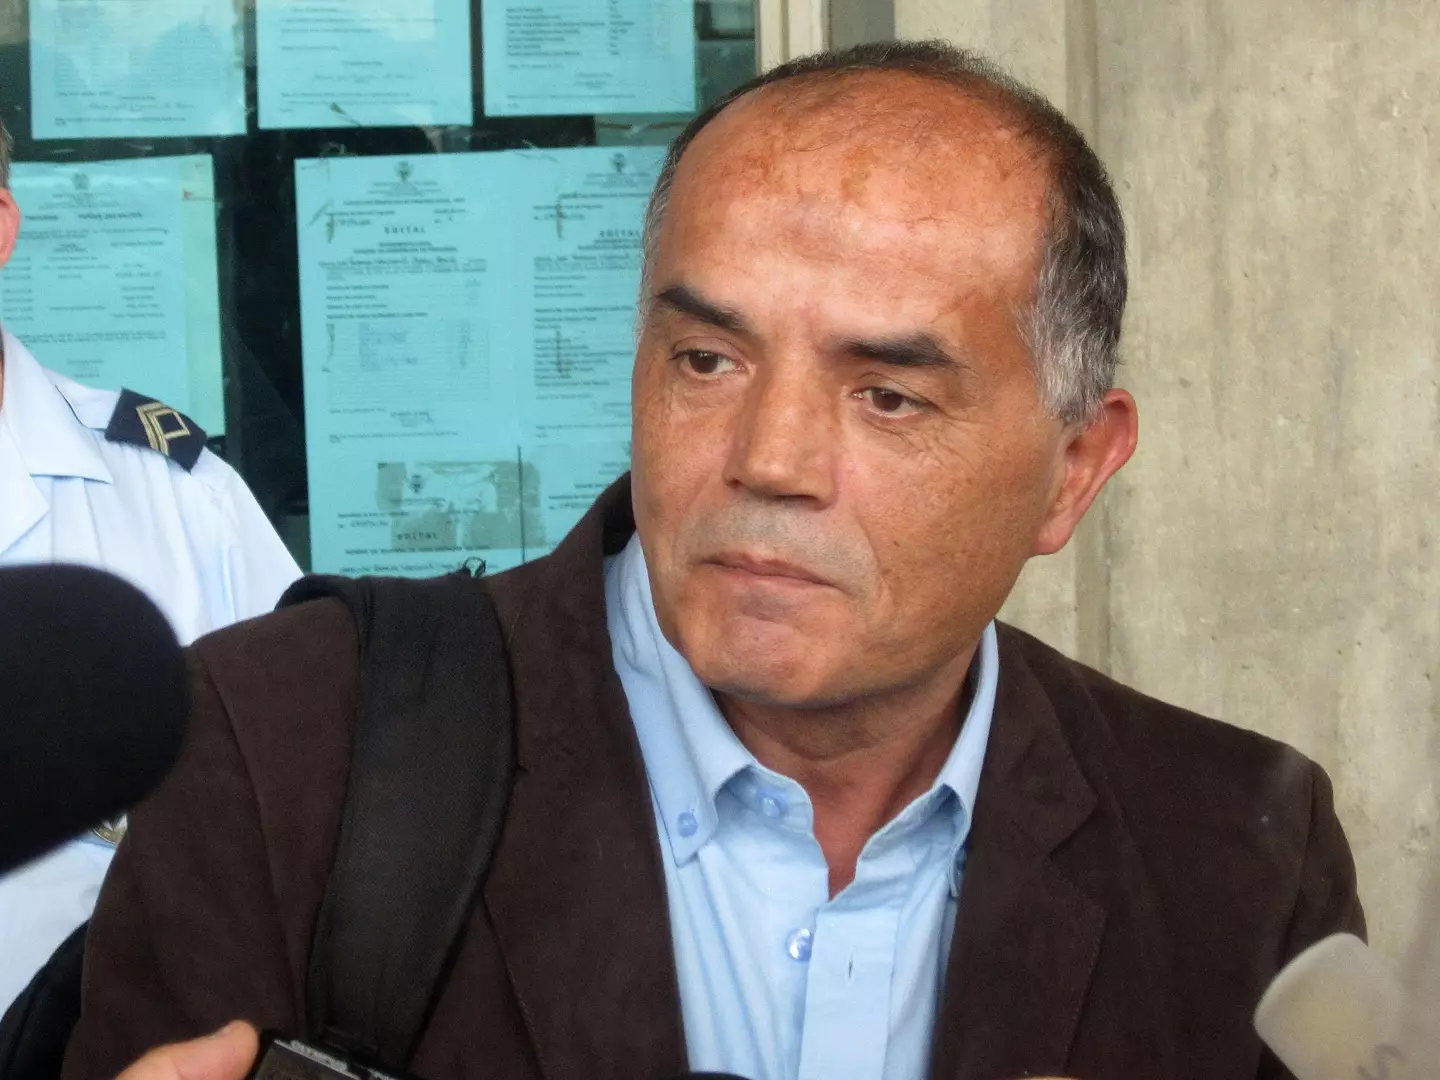 Amaral's had no 'serious impact on the applicants’ social relations or on their legitimate and ongoing attempts to find their daughter' the ECHR ruled.